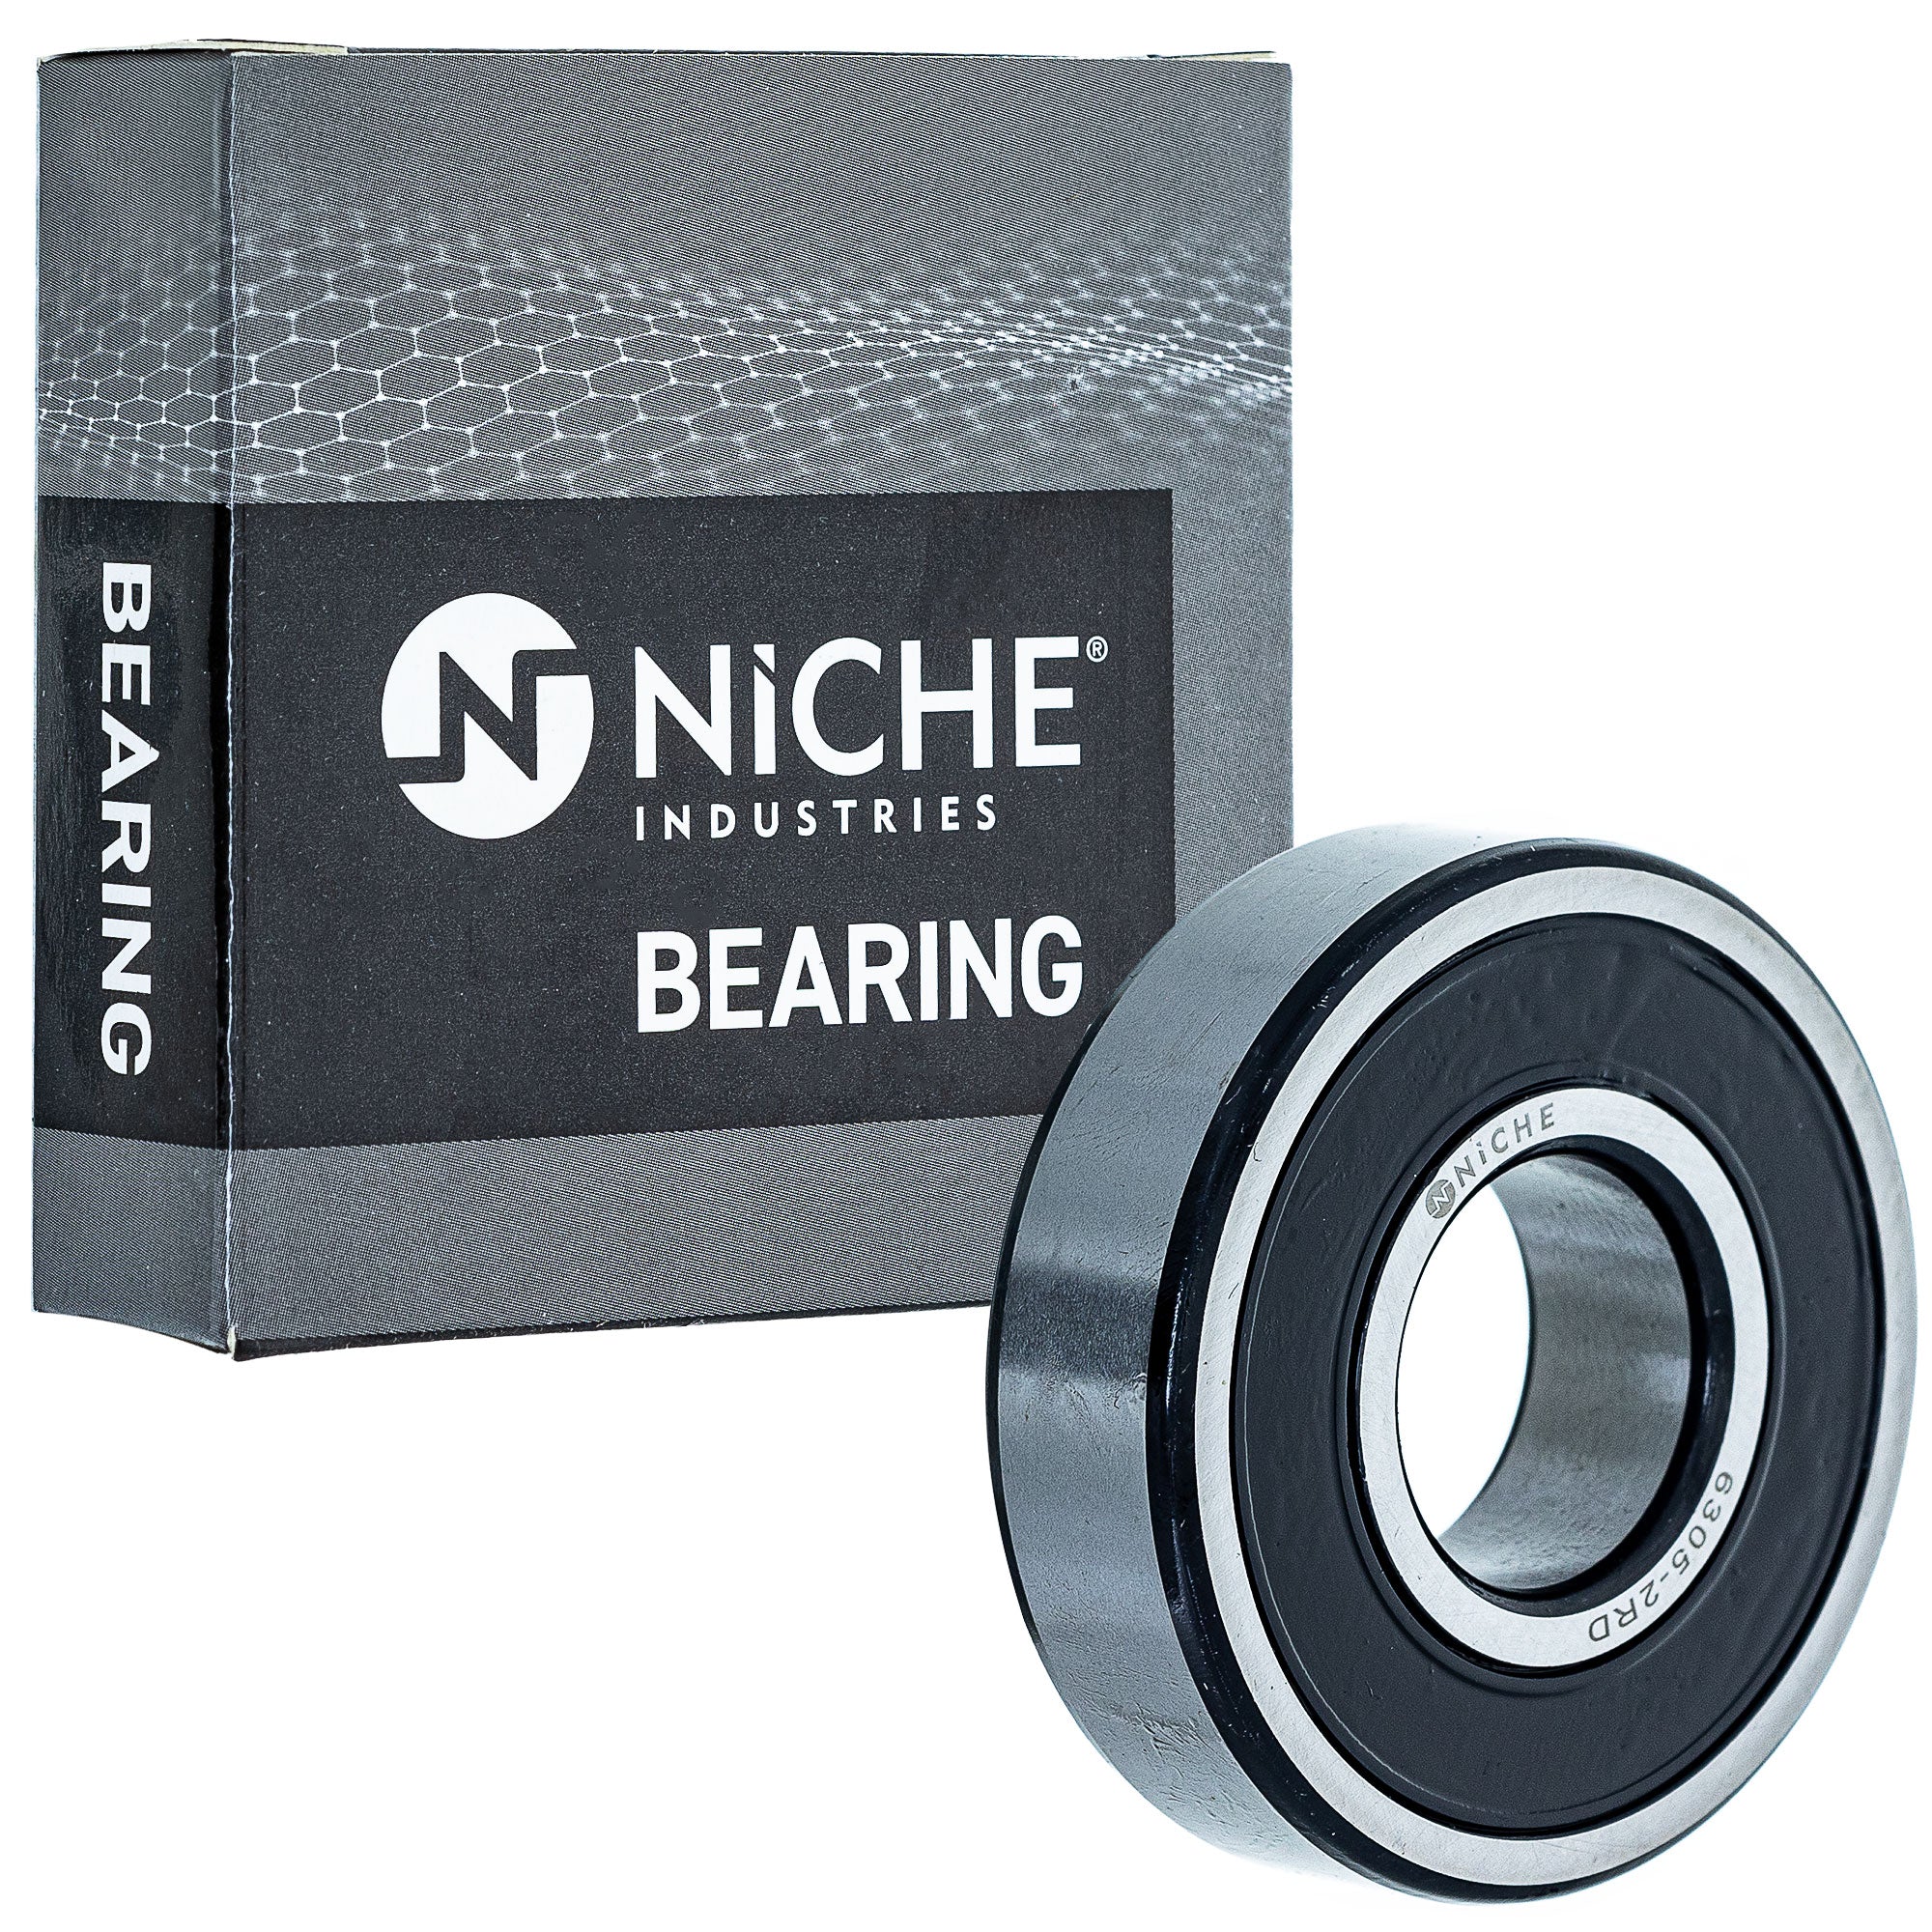 NICHE 519-CBB2290R Bearing 10-Pack for zOTHER TX500 Tempter SV650S